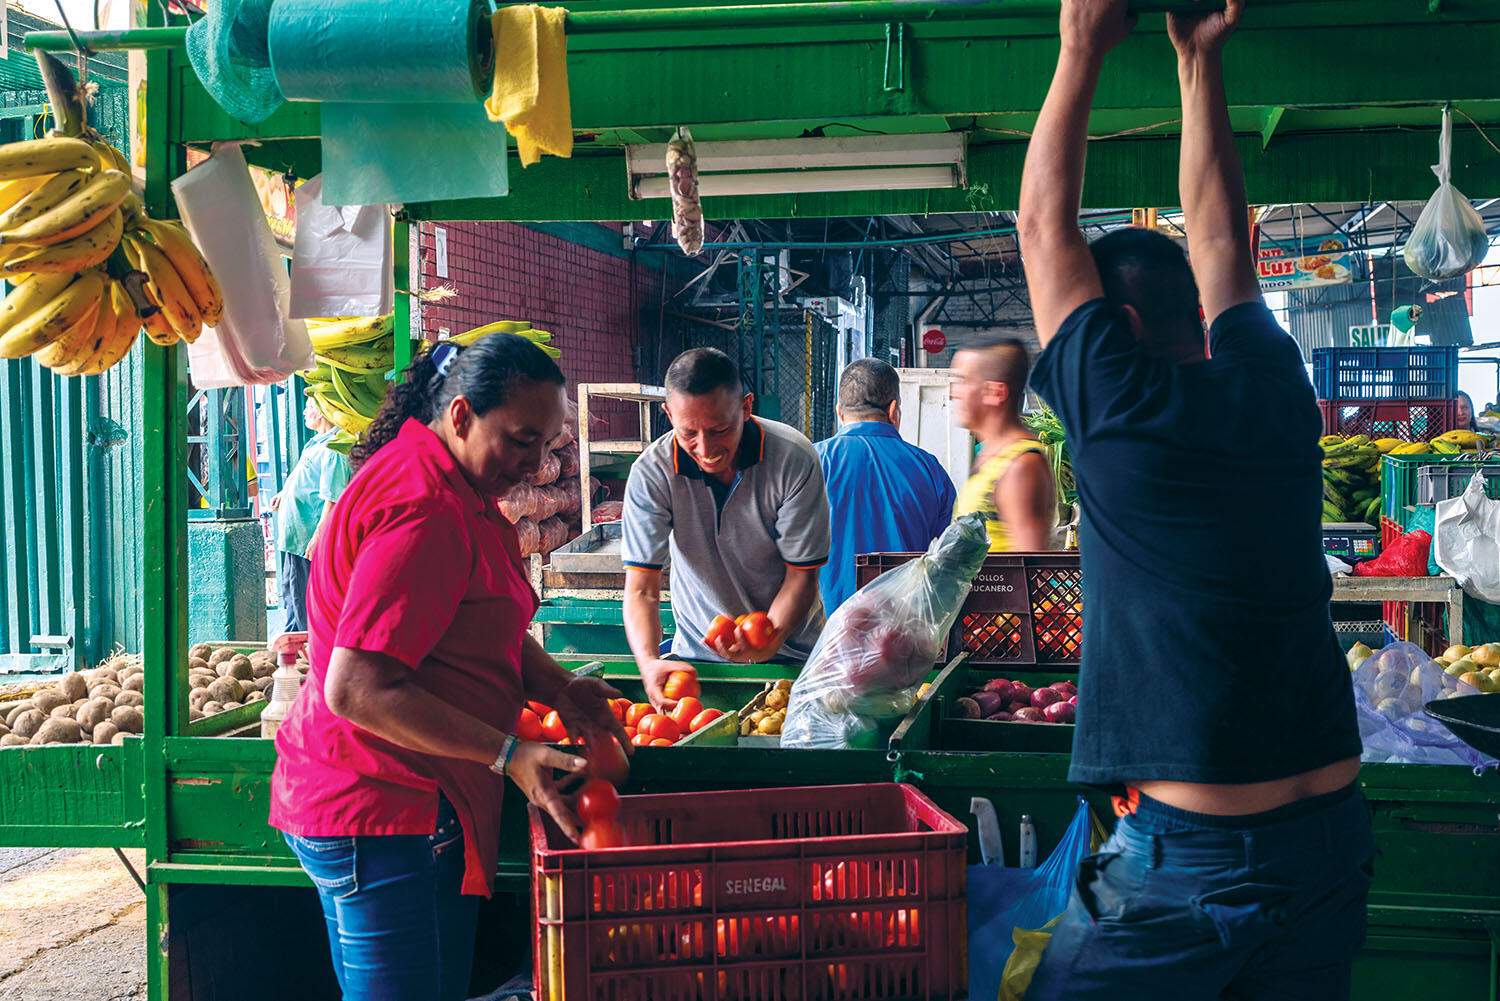 In the foreground from left to right, El Porvenir vendors Yesenia Orrego, James Hernández, and Celso Elvis Ordóñez store produce at day’s end. (Photo by Fabian Villa.)